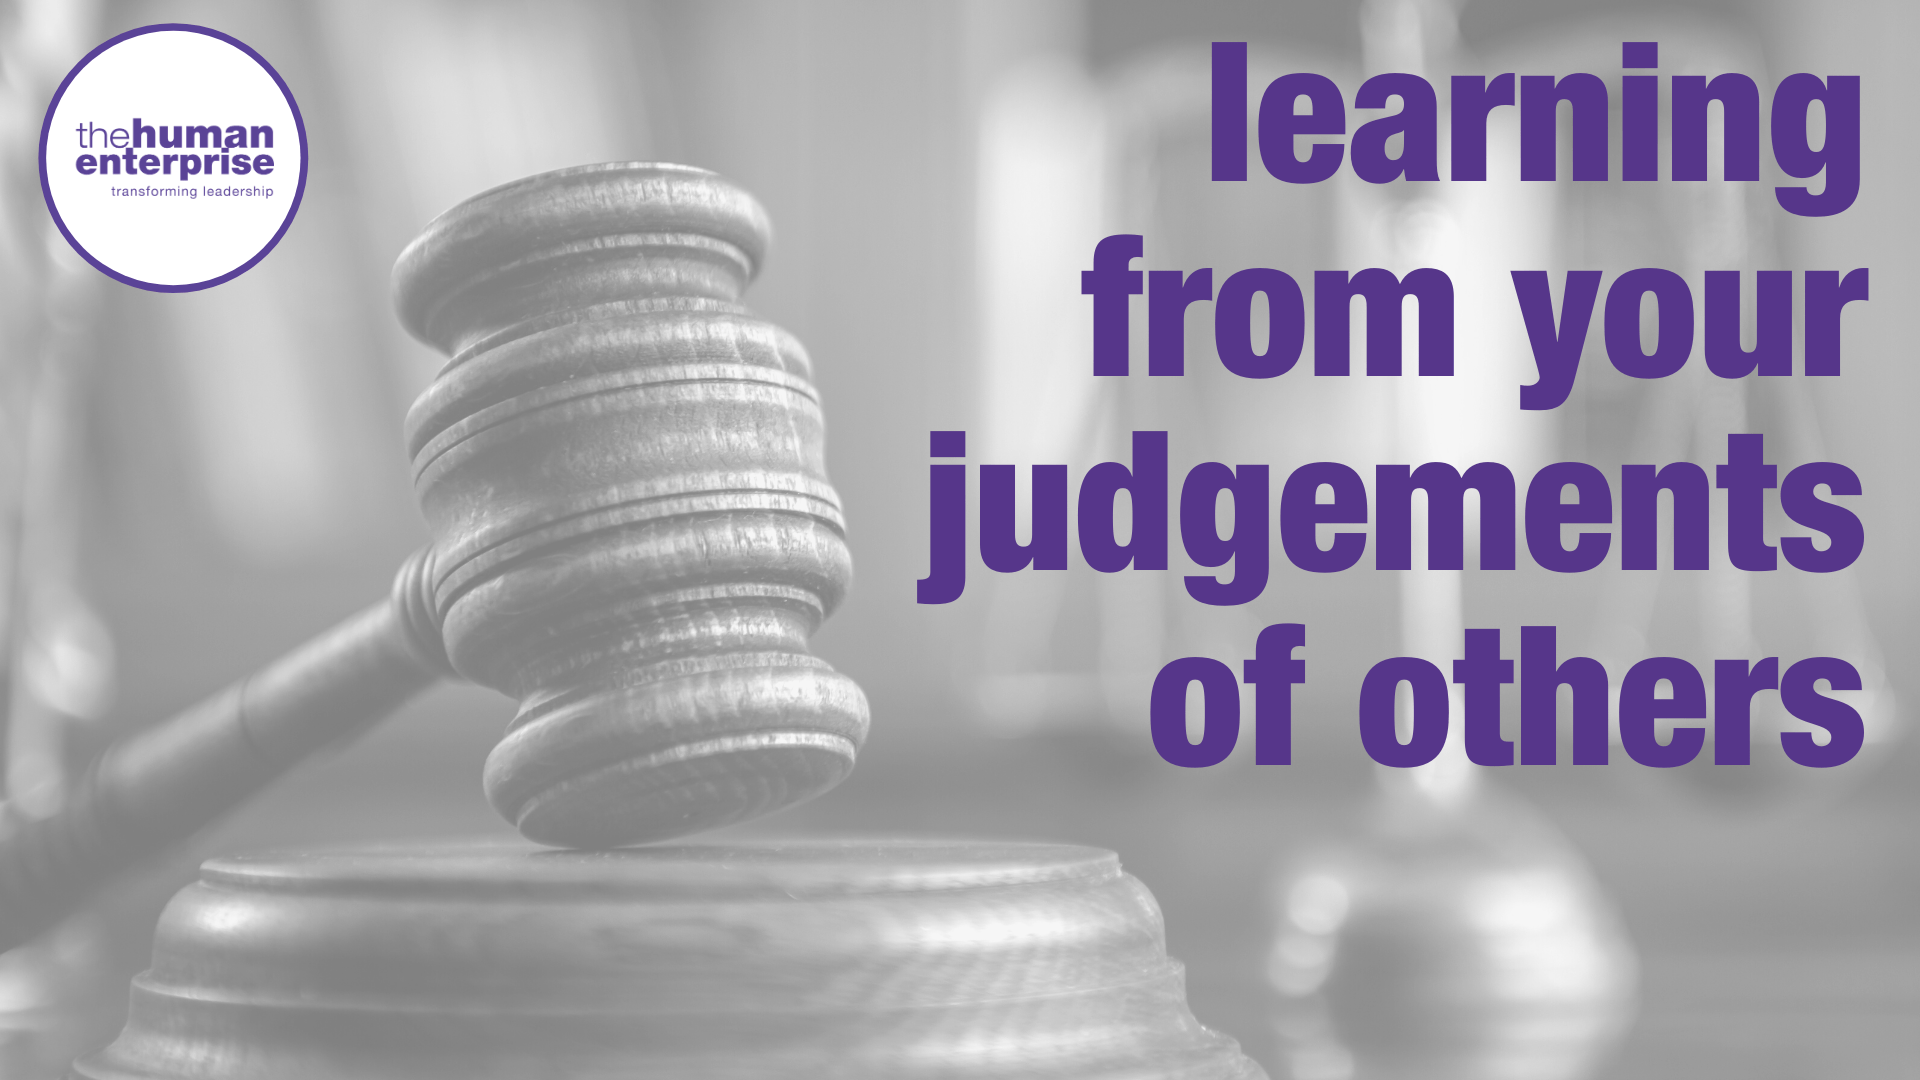 Learning from your judgements of others | Leadership Training Sydney | the human enterprise